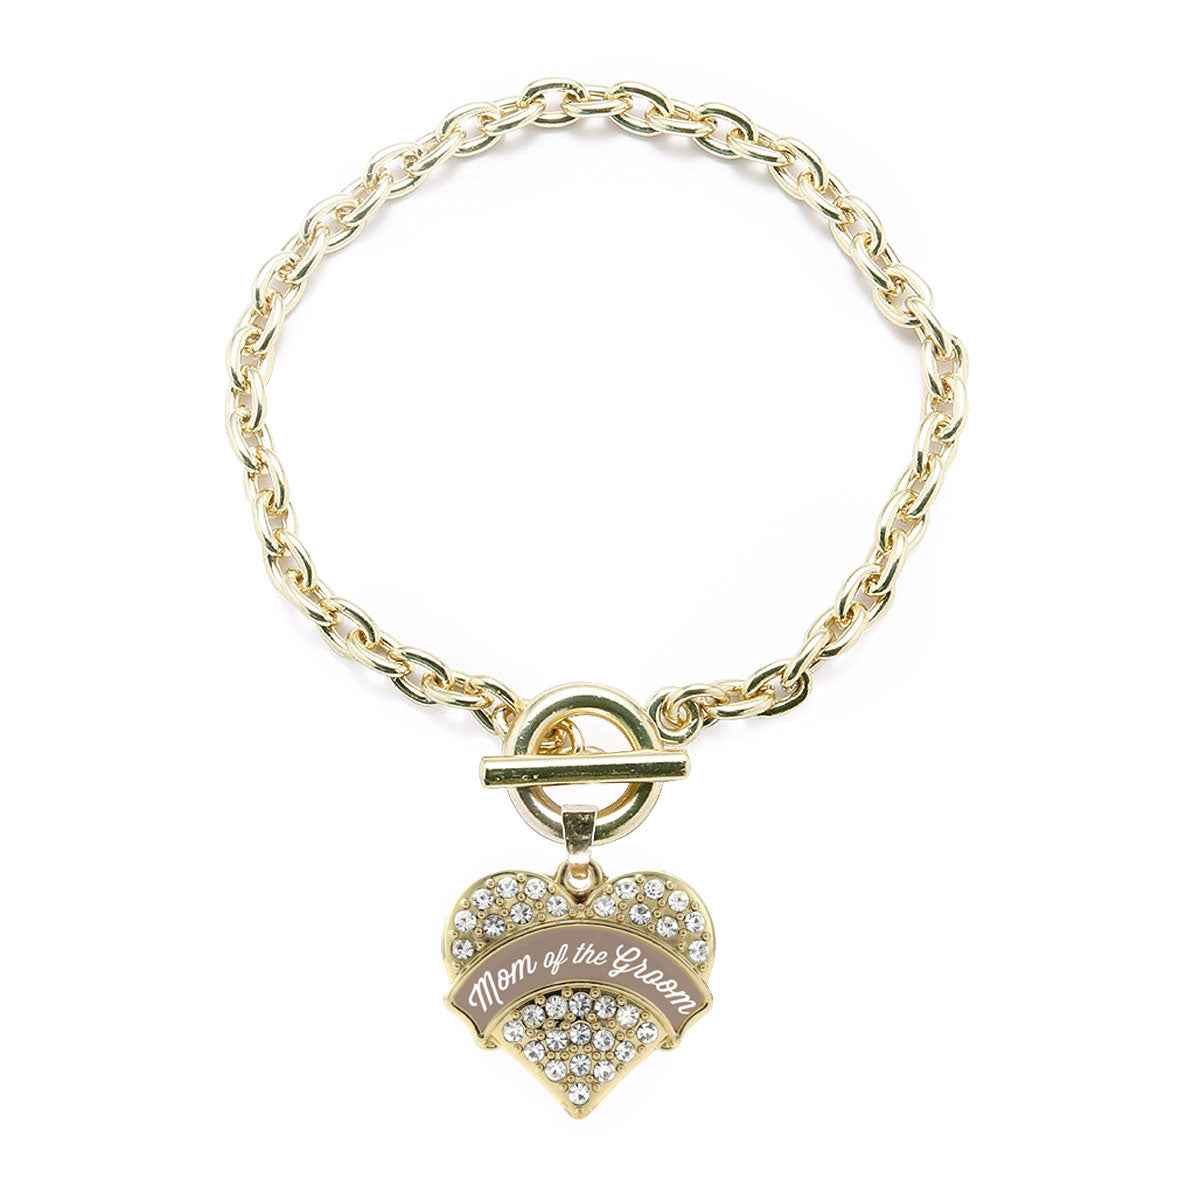 Gold Brown and White Mom of the Groom Pave Heart Charm Toggle Bracelet